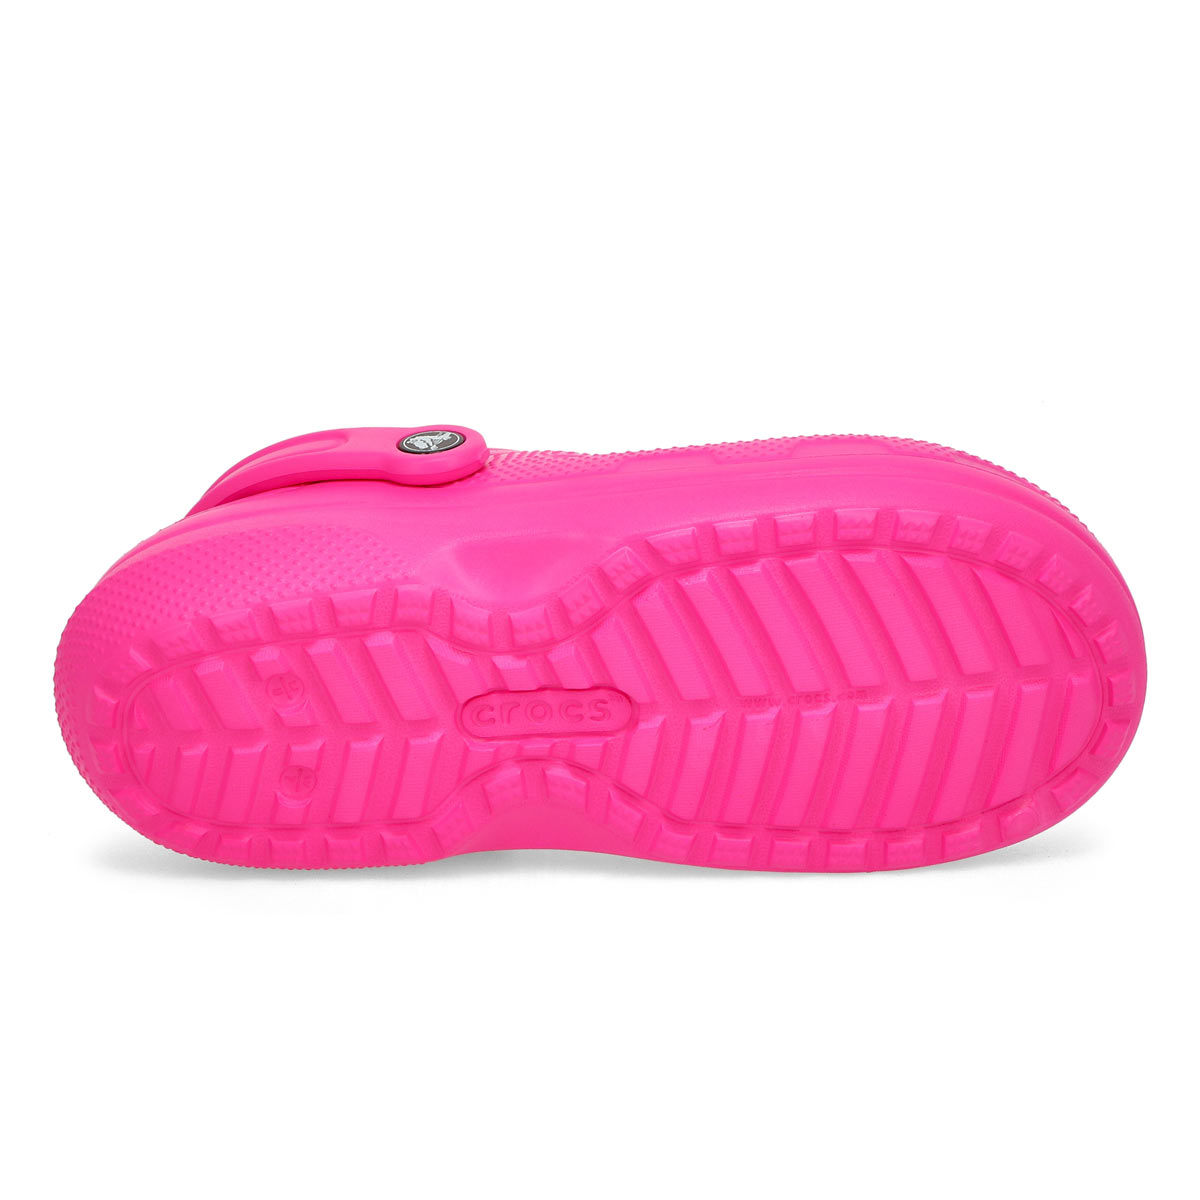 Women's Classic Lined Clog - Pink